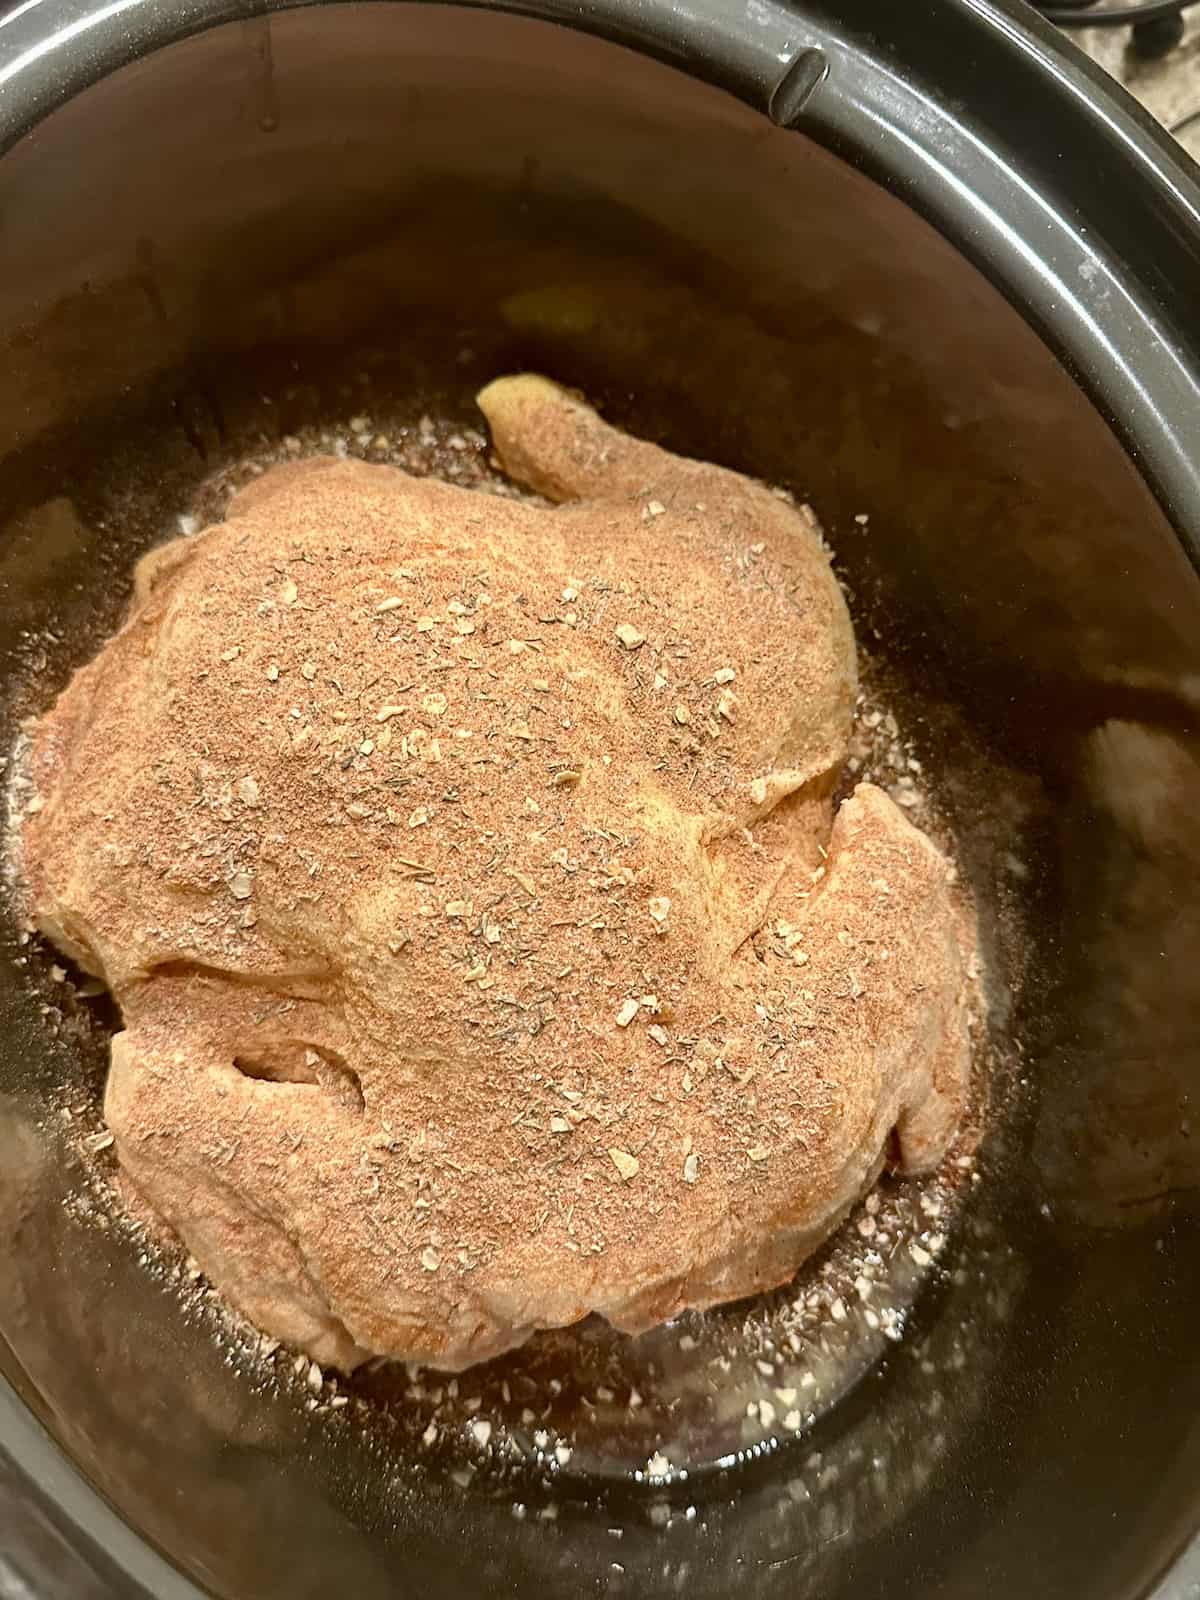 uncooked whole rotisserie chicken in a crockpot